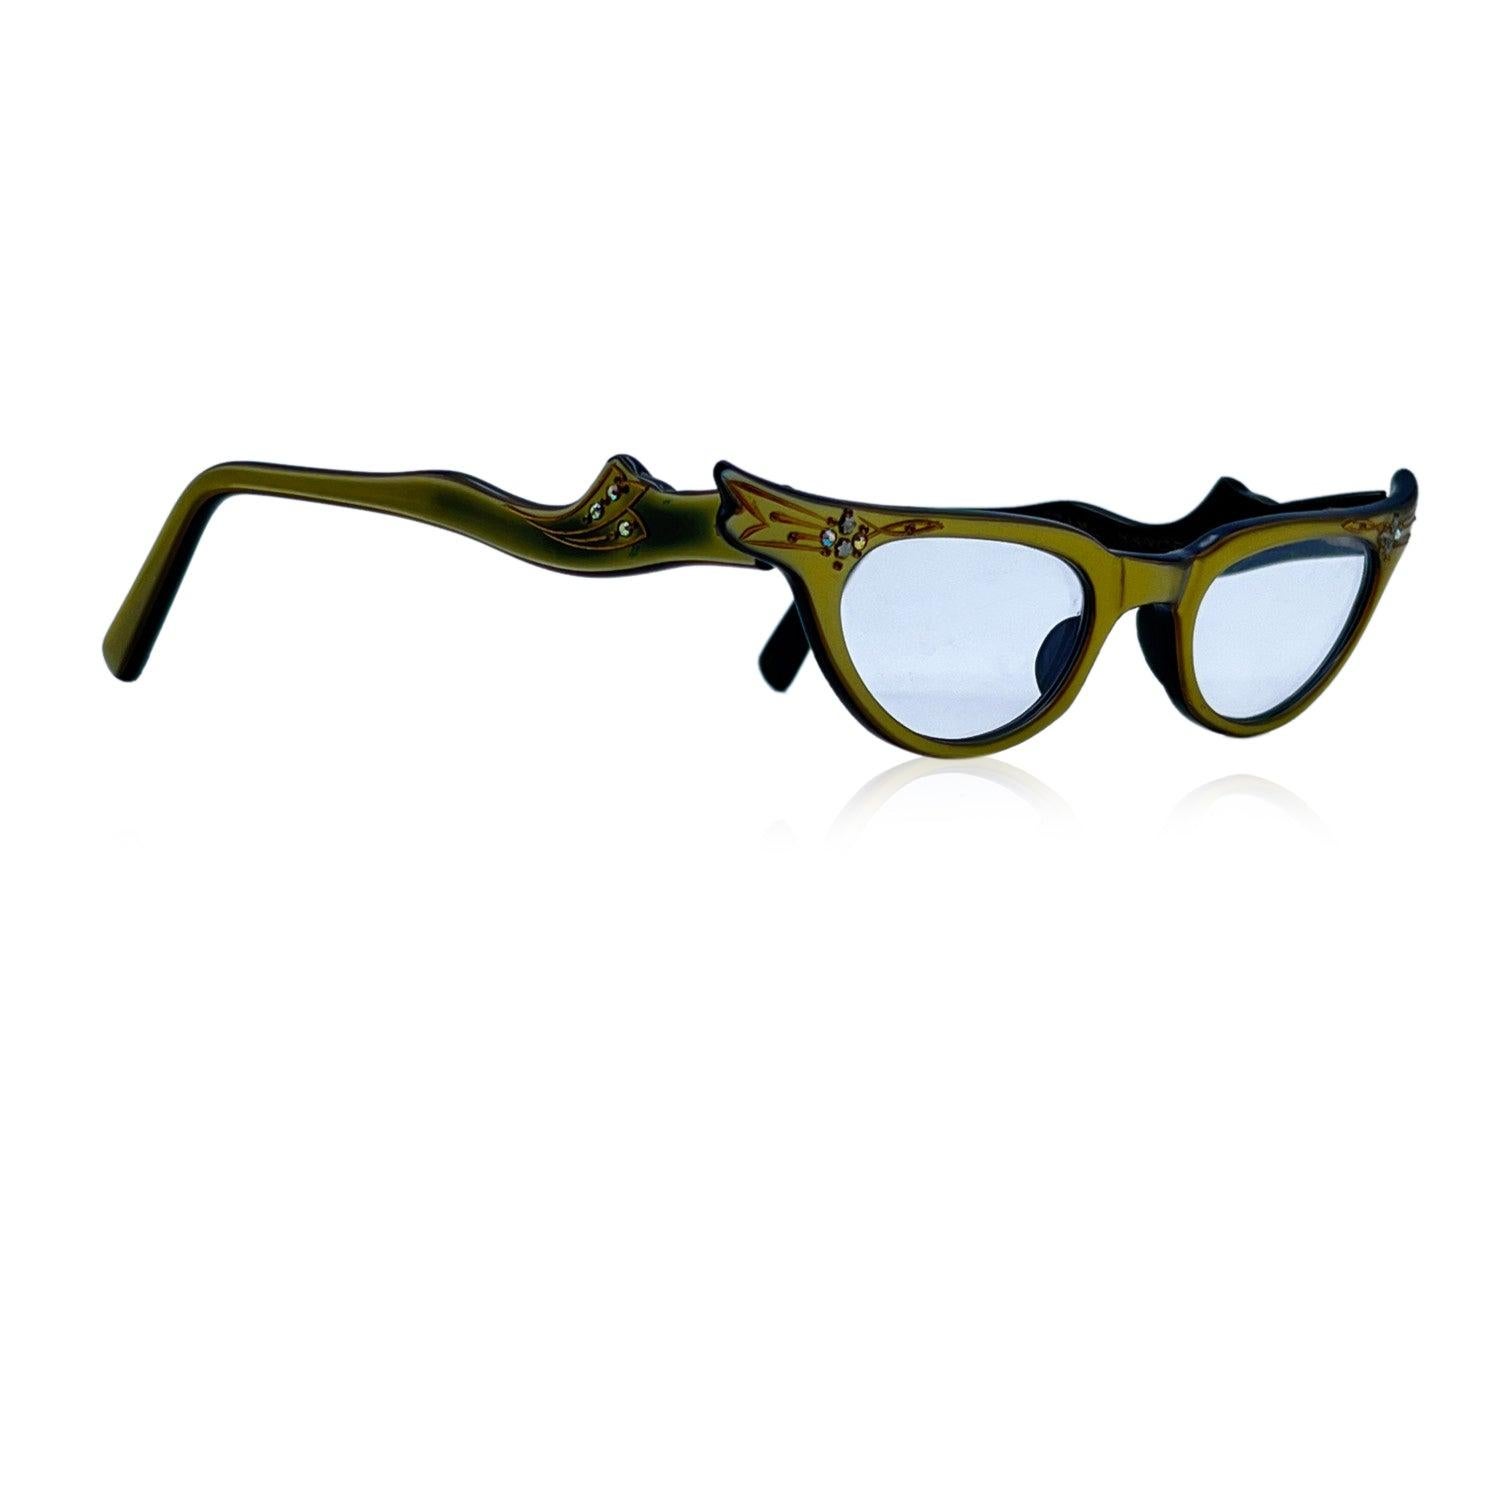 Unique vintage cat-eye frame, timeless and classy. Made with an acetate gold tone based frame with rhinestones and small golden studs detailing on corners. Made in France. Details MATERIAL: Acetate COLOR: Gold MODEL: - GENDER: Women COUNTRY OF